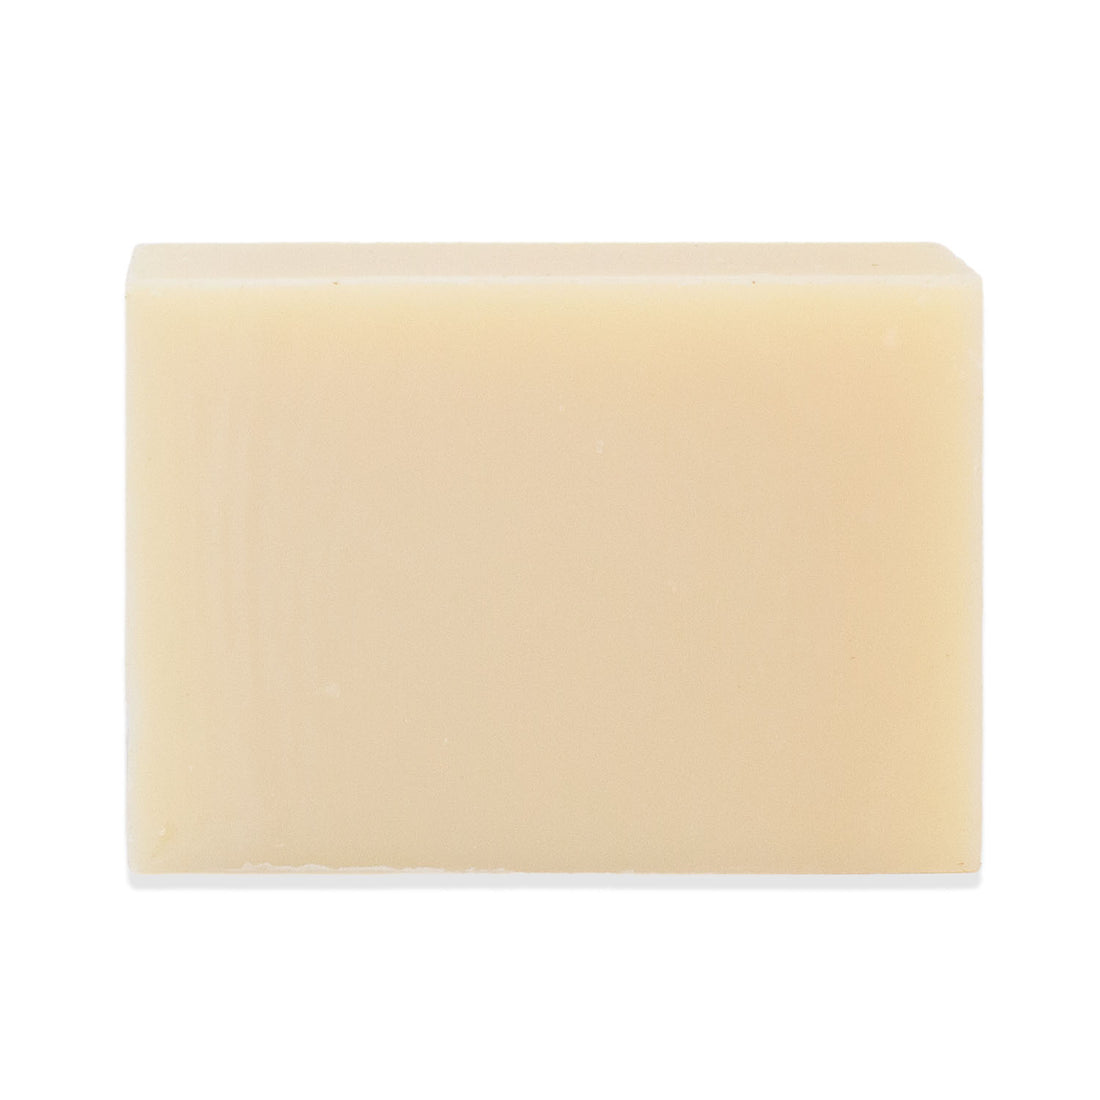 Miracle Butter Cream Facial &amp; Body Soap All Natural Unscented, miraclebuttercream.com